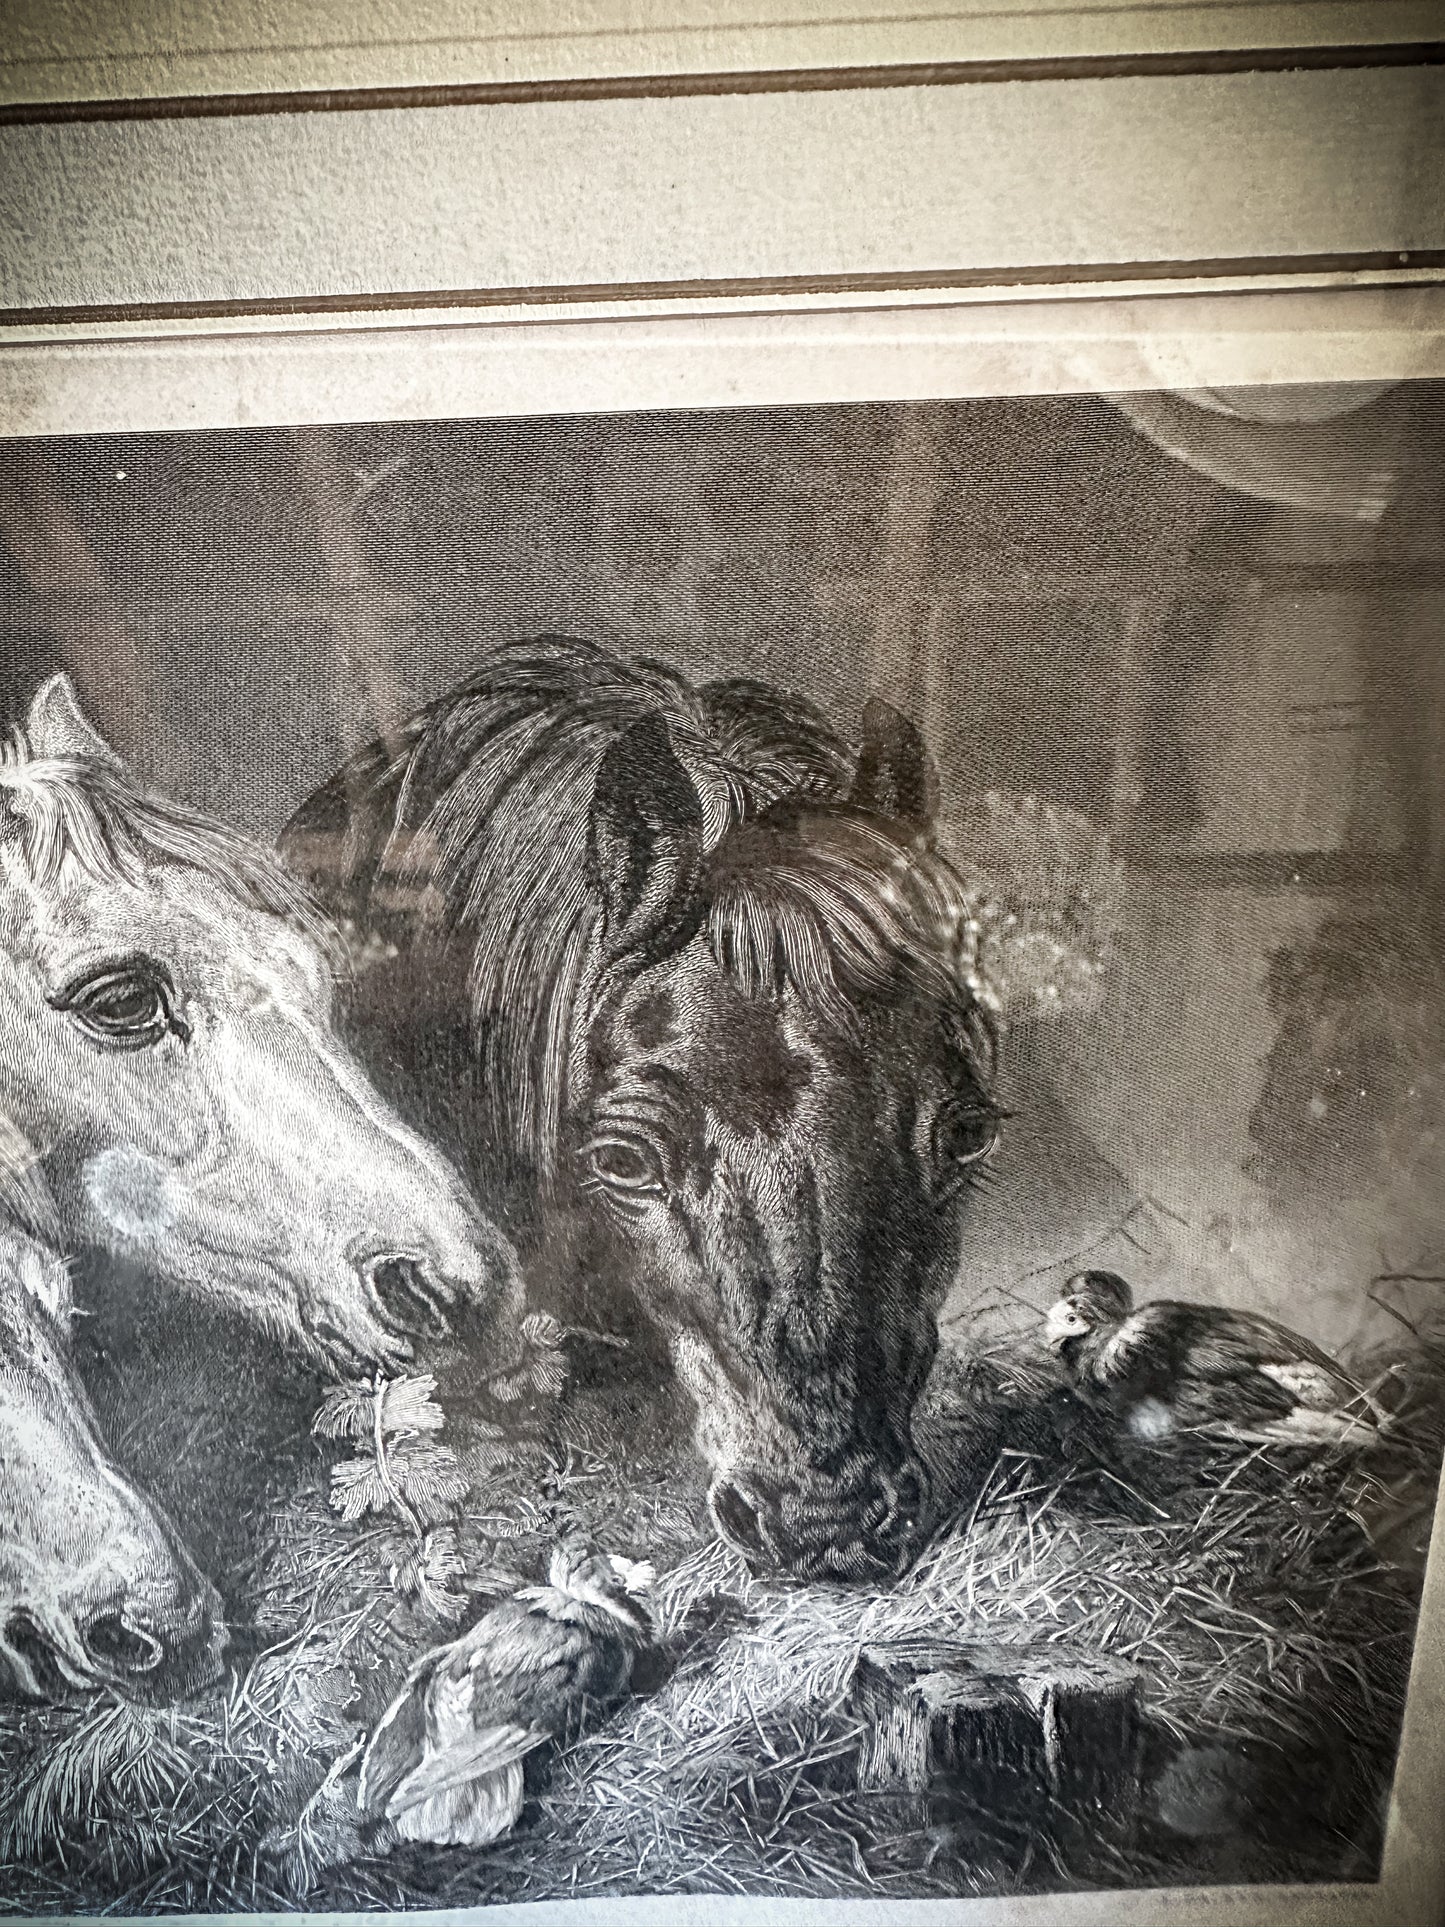 A beautiful framed antique French horse Print called “Les Trois Convives” - The Three Guests